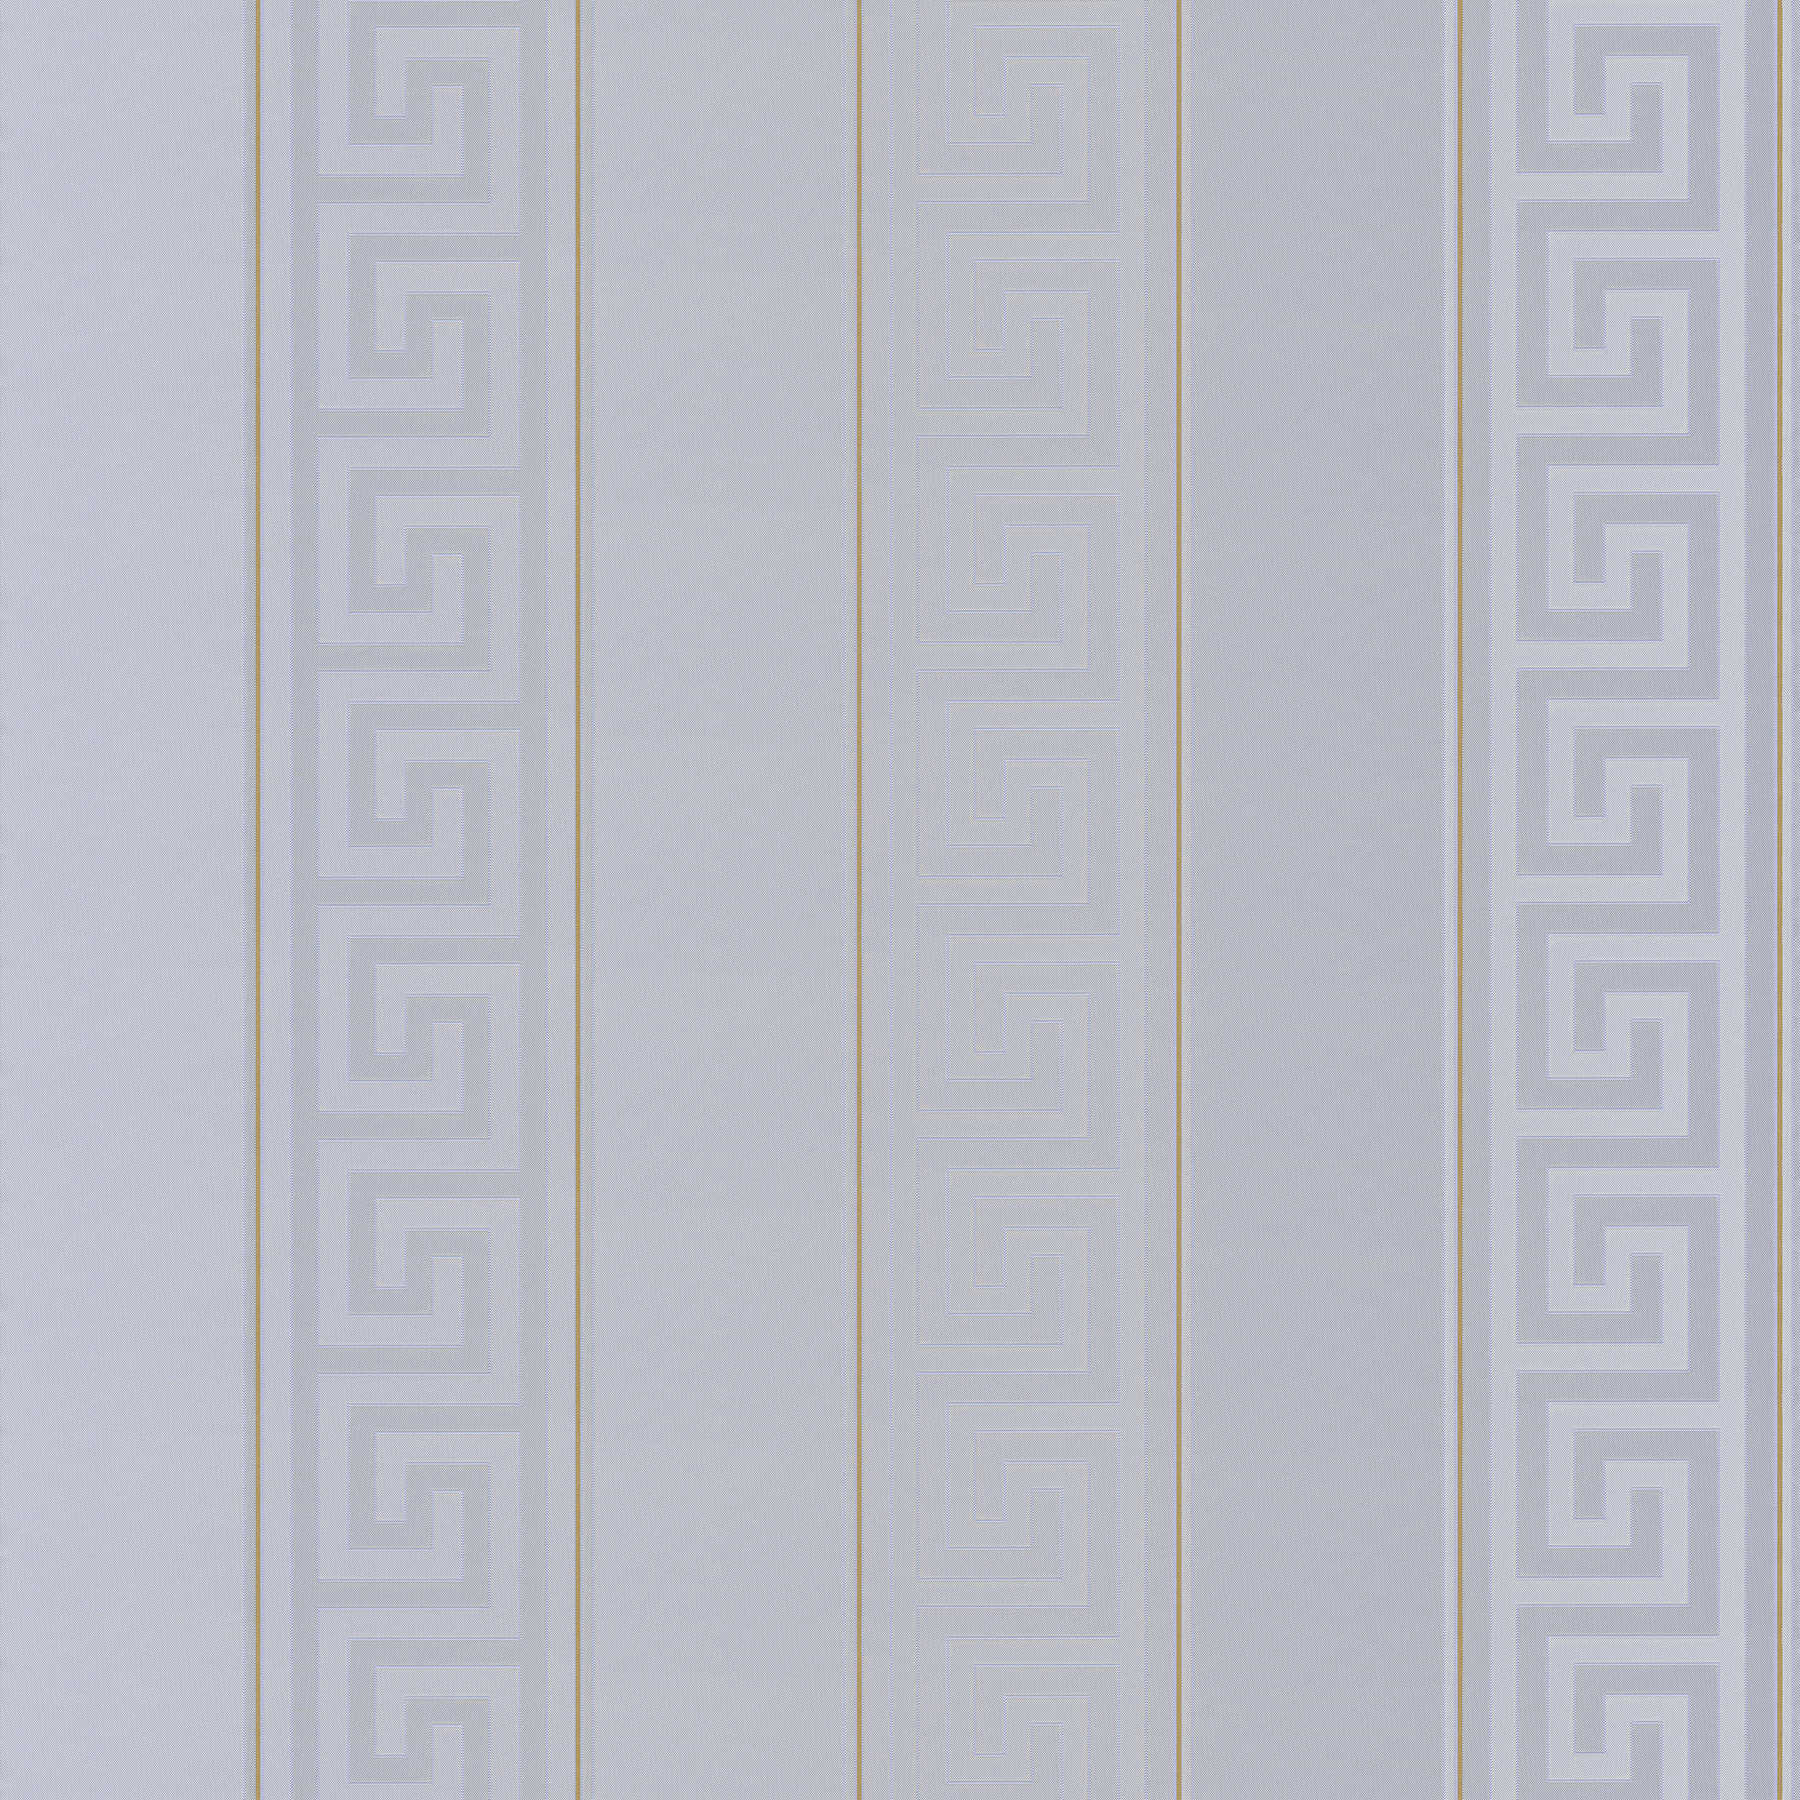         VERSACE wallpaper striped with metallic effect - silver, grey
    